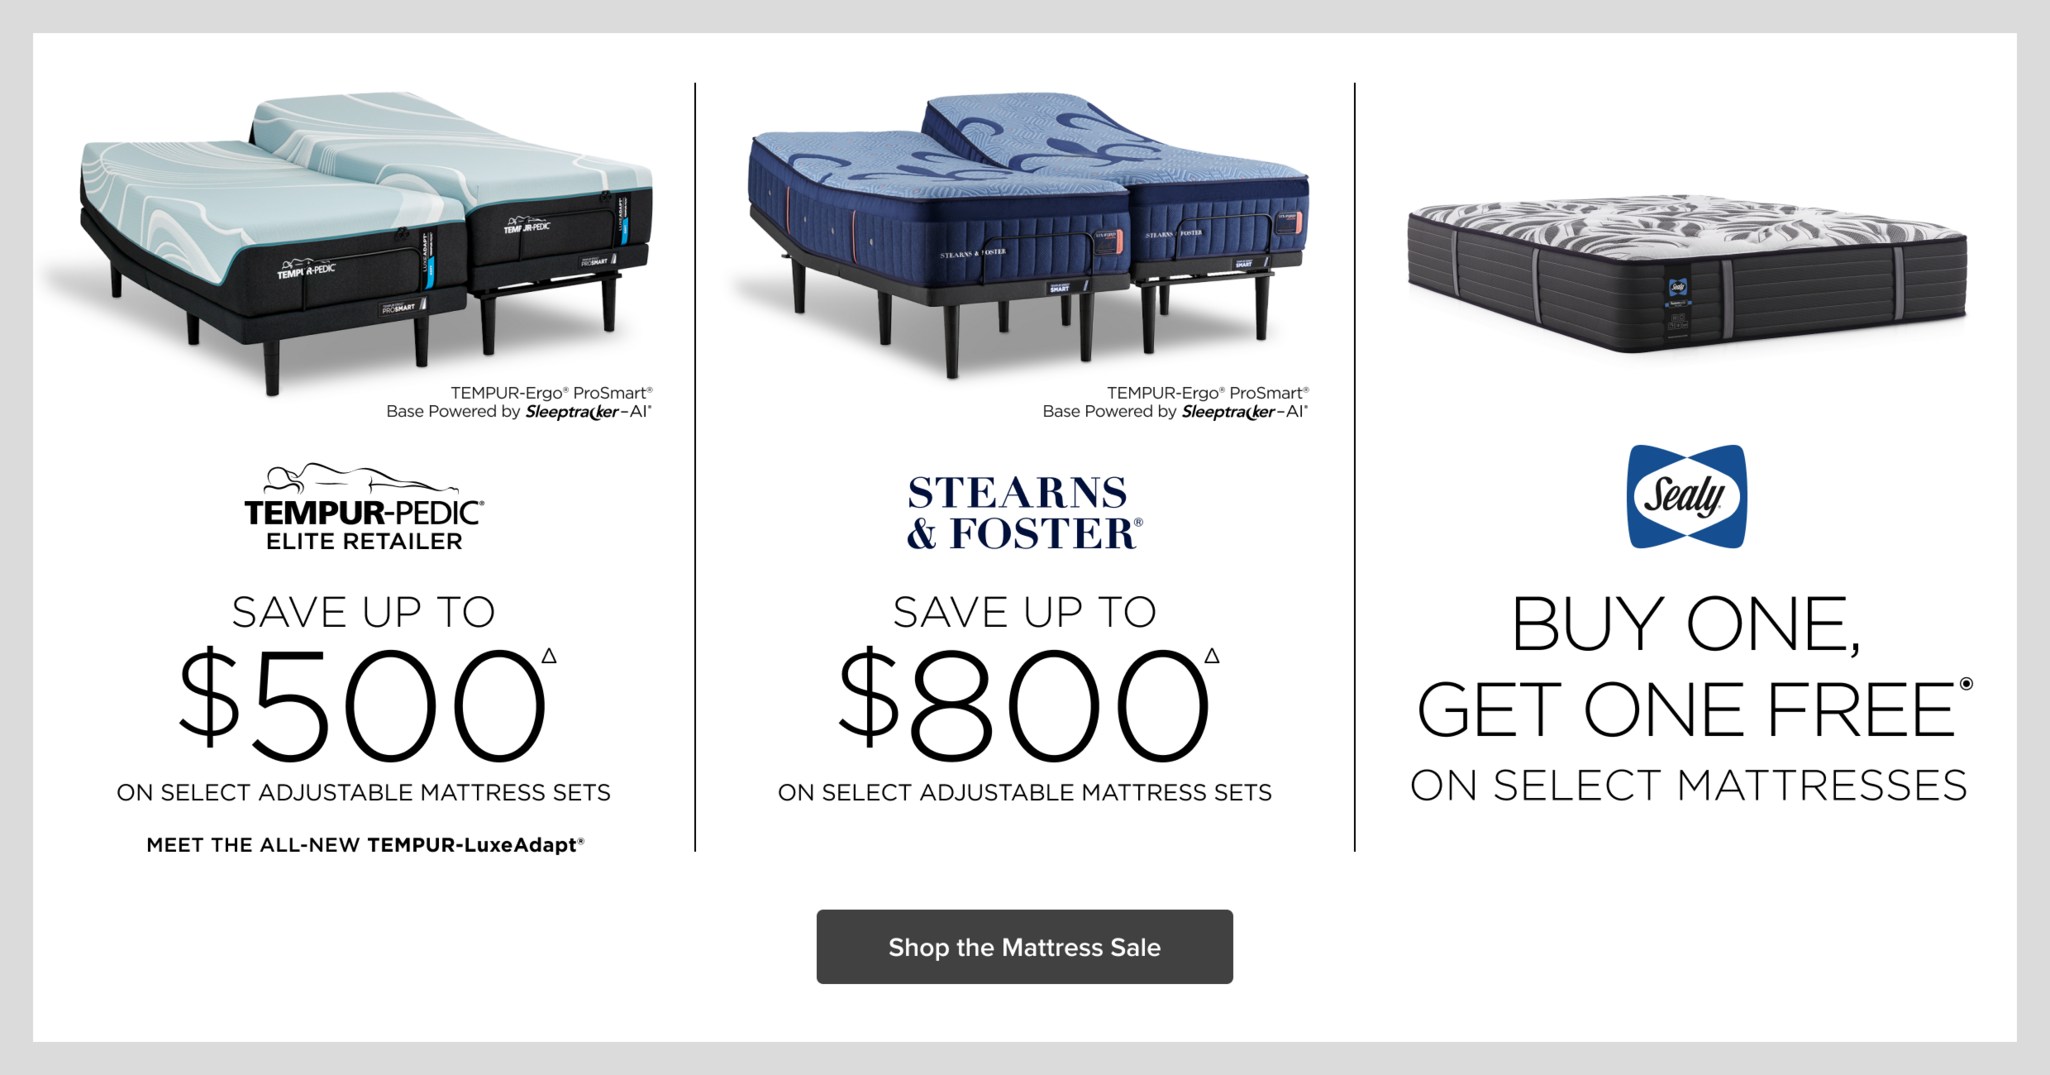 Save up to $800 on select mattress sets. - Shop the Mattress Sale